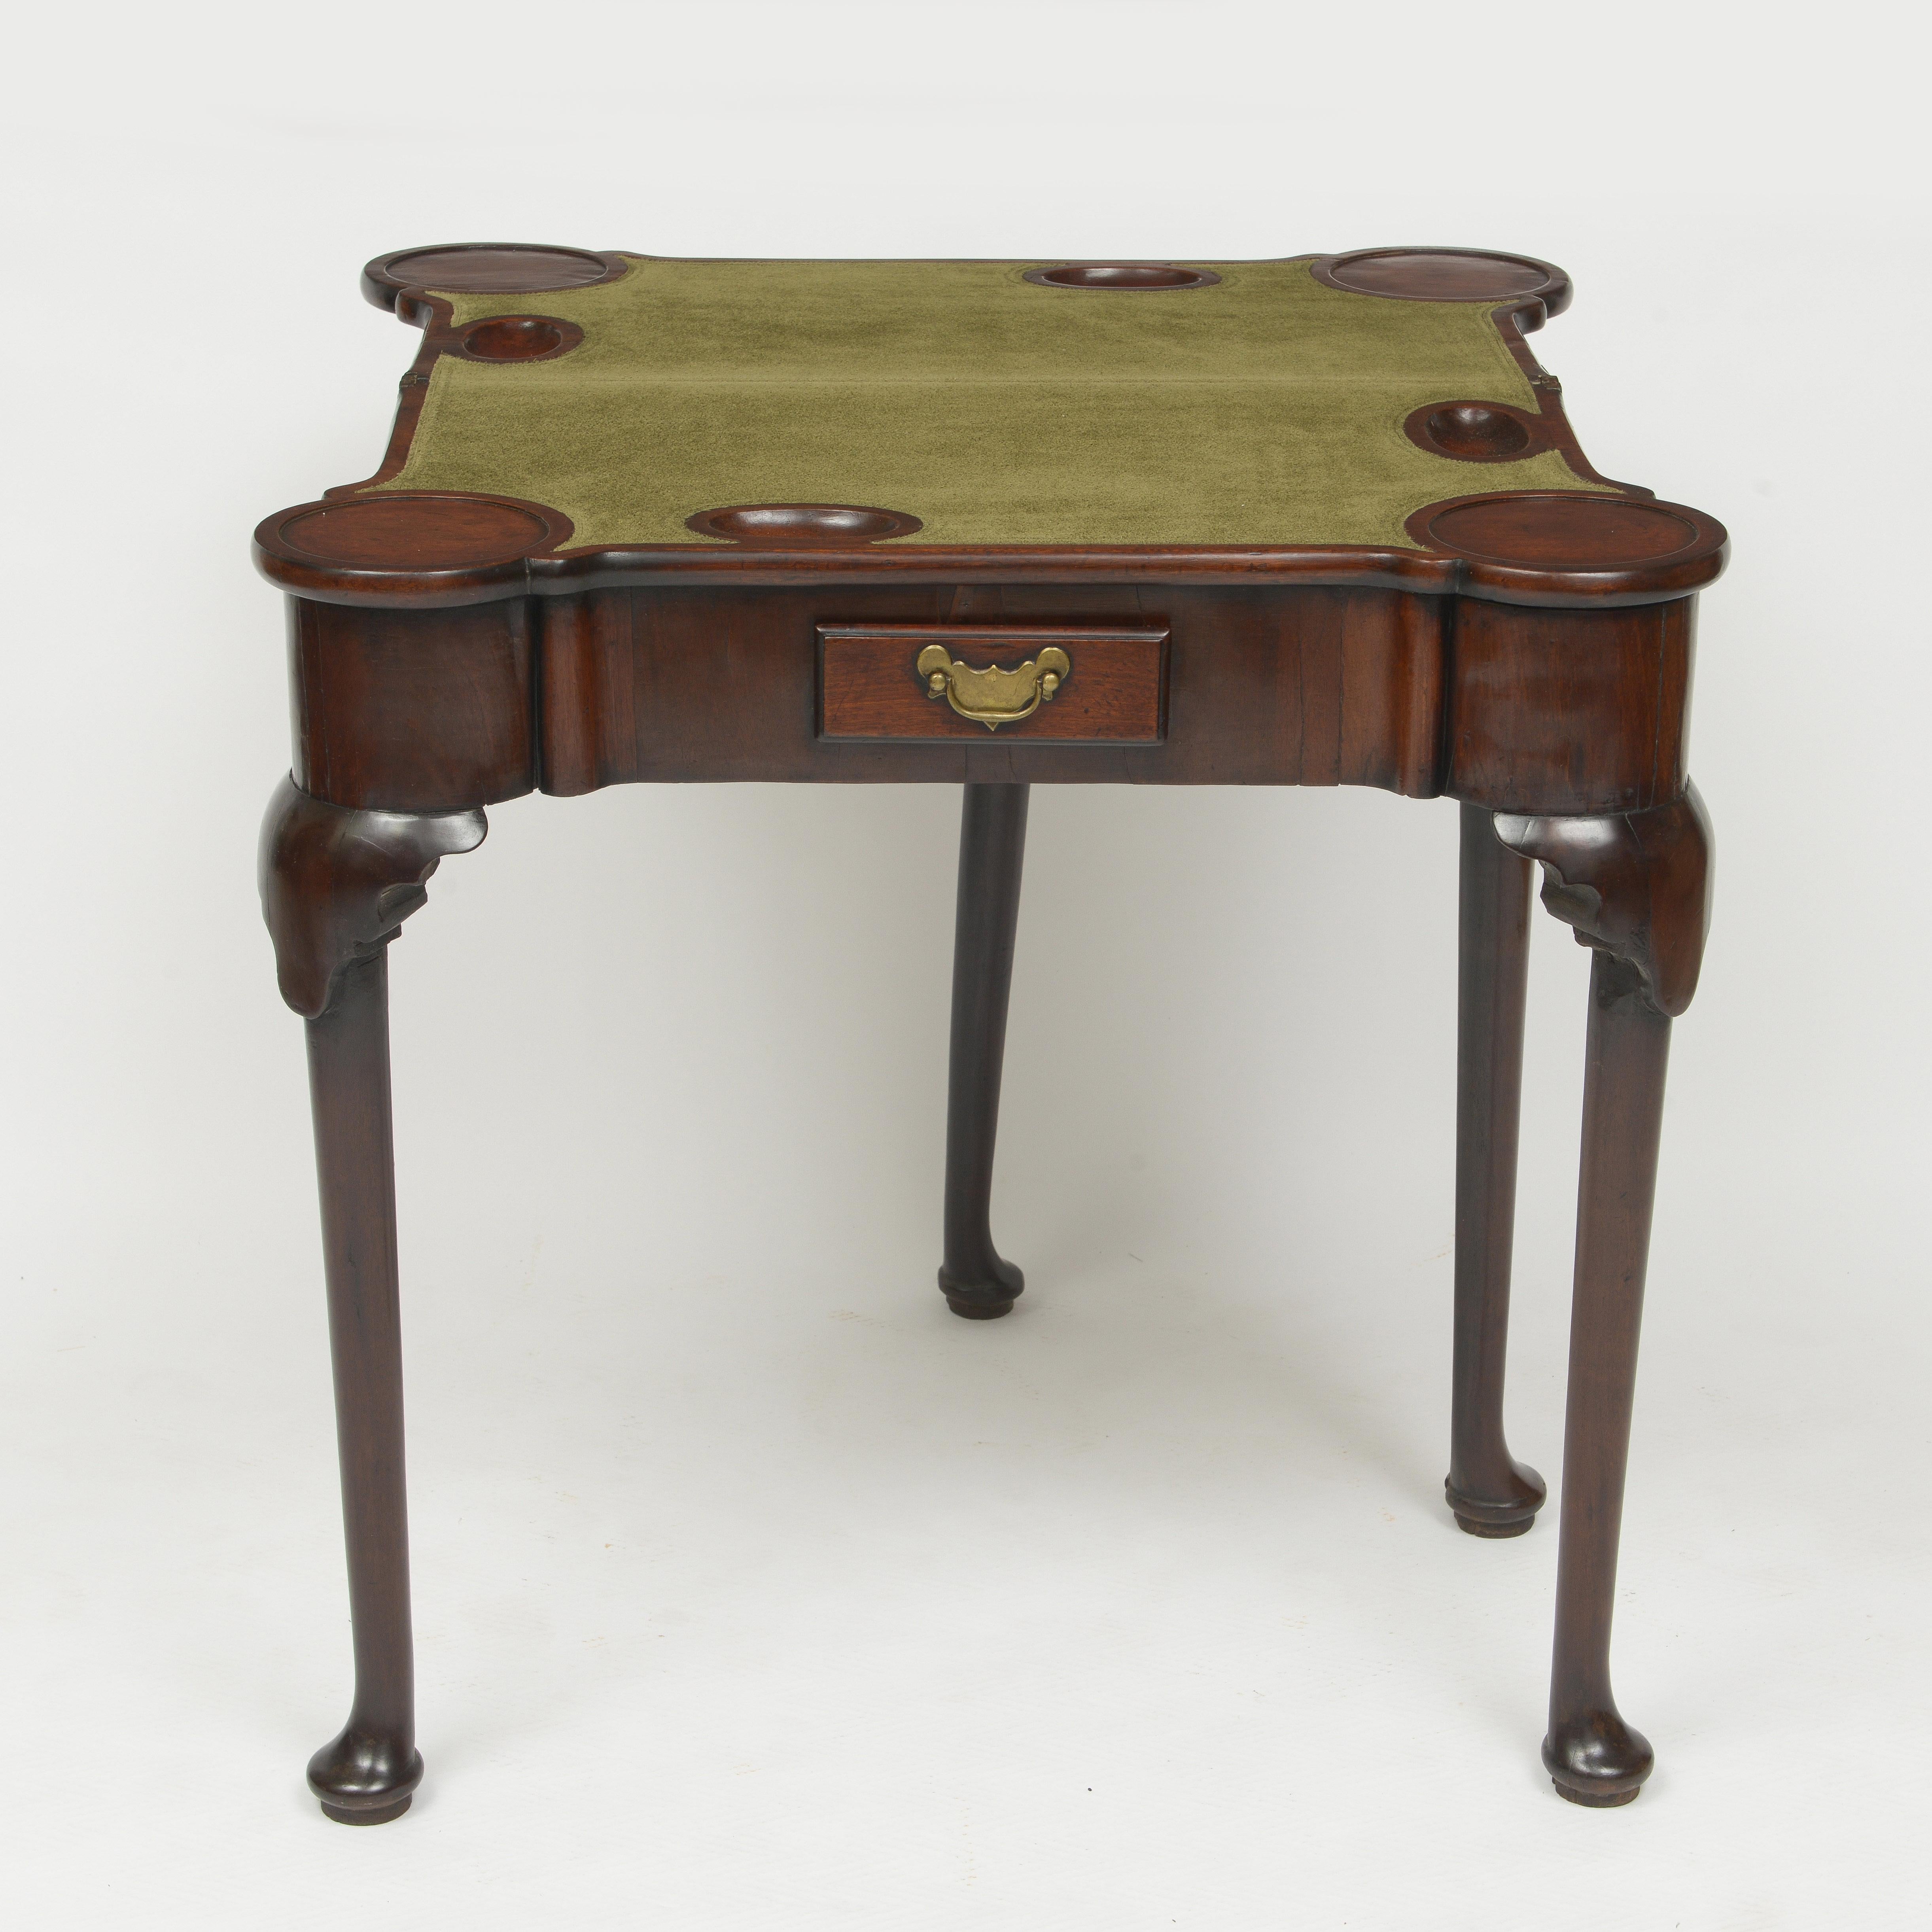 18th century walnut gaming table with green suede playing surface.
Fold over table is supported by a single gate leg.
Contains a single drawer with period brass handle
When open to card table it measures 30” x 30”